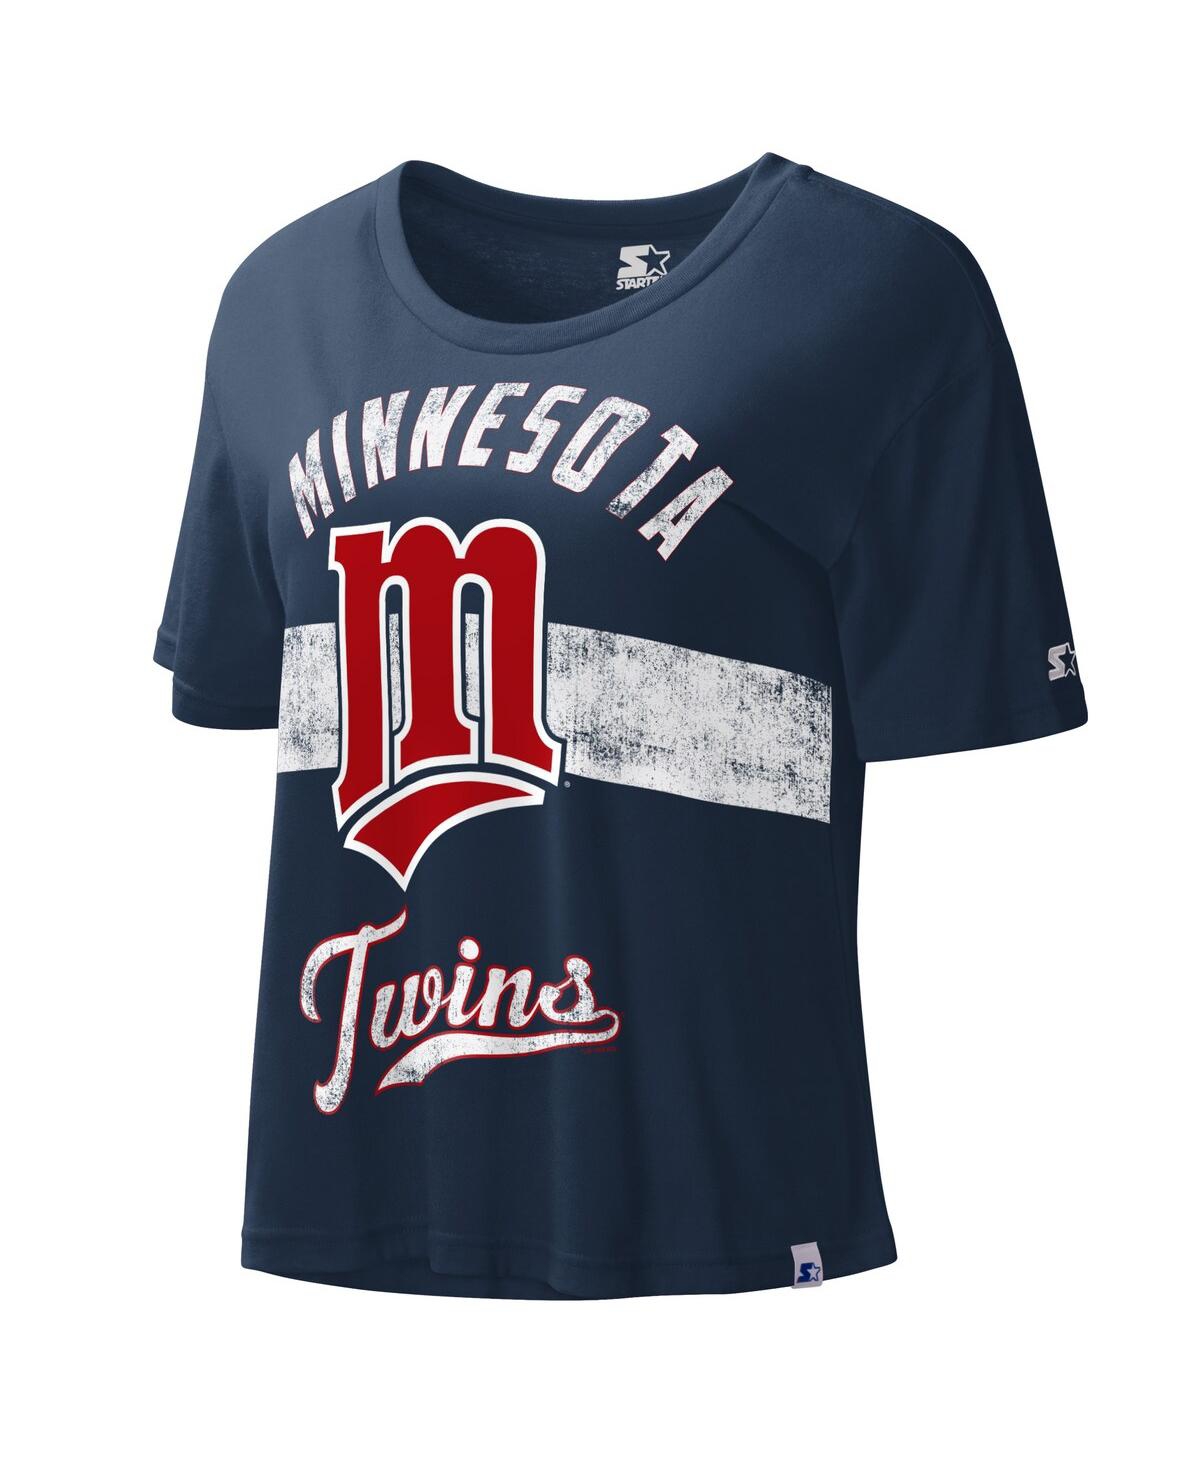 Shop Starter Women's  Navy Distressed Minnesota Twins Cooperstown Collection Record Setter Crop Top